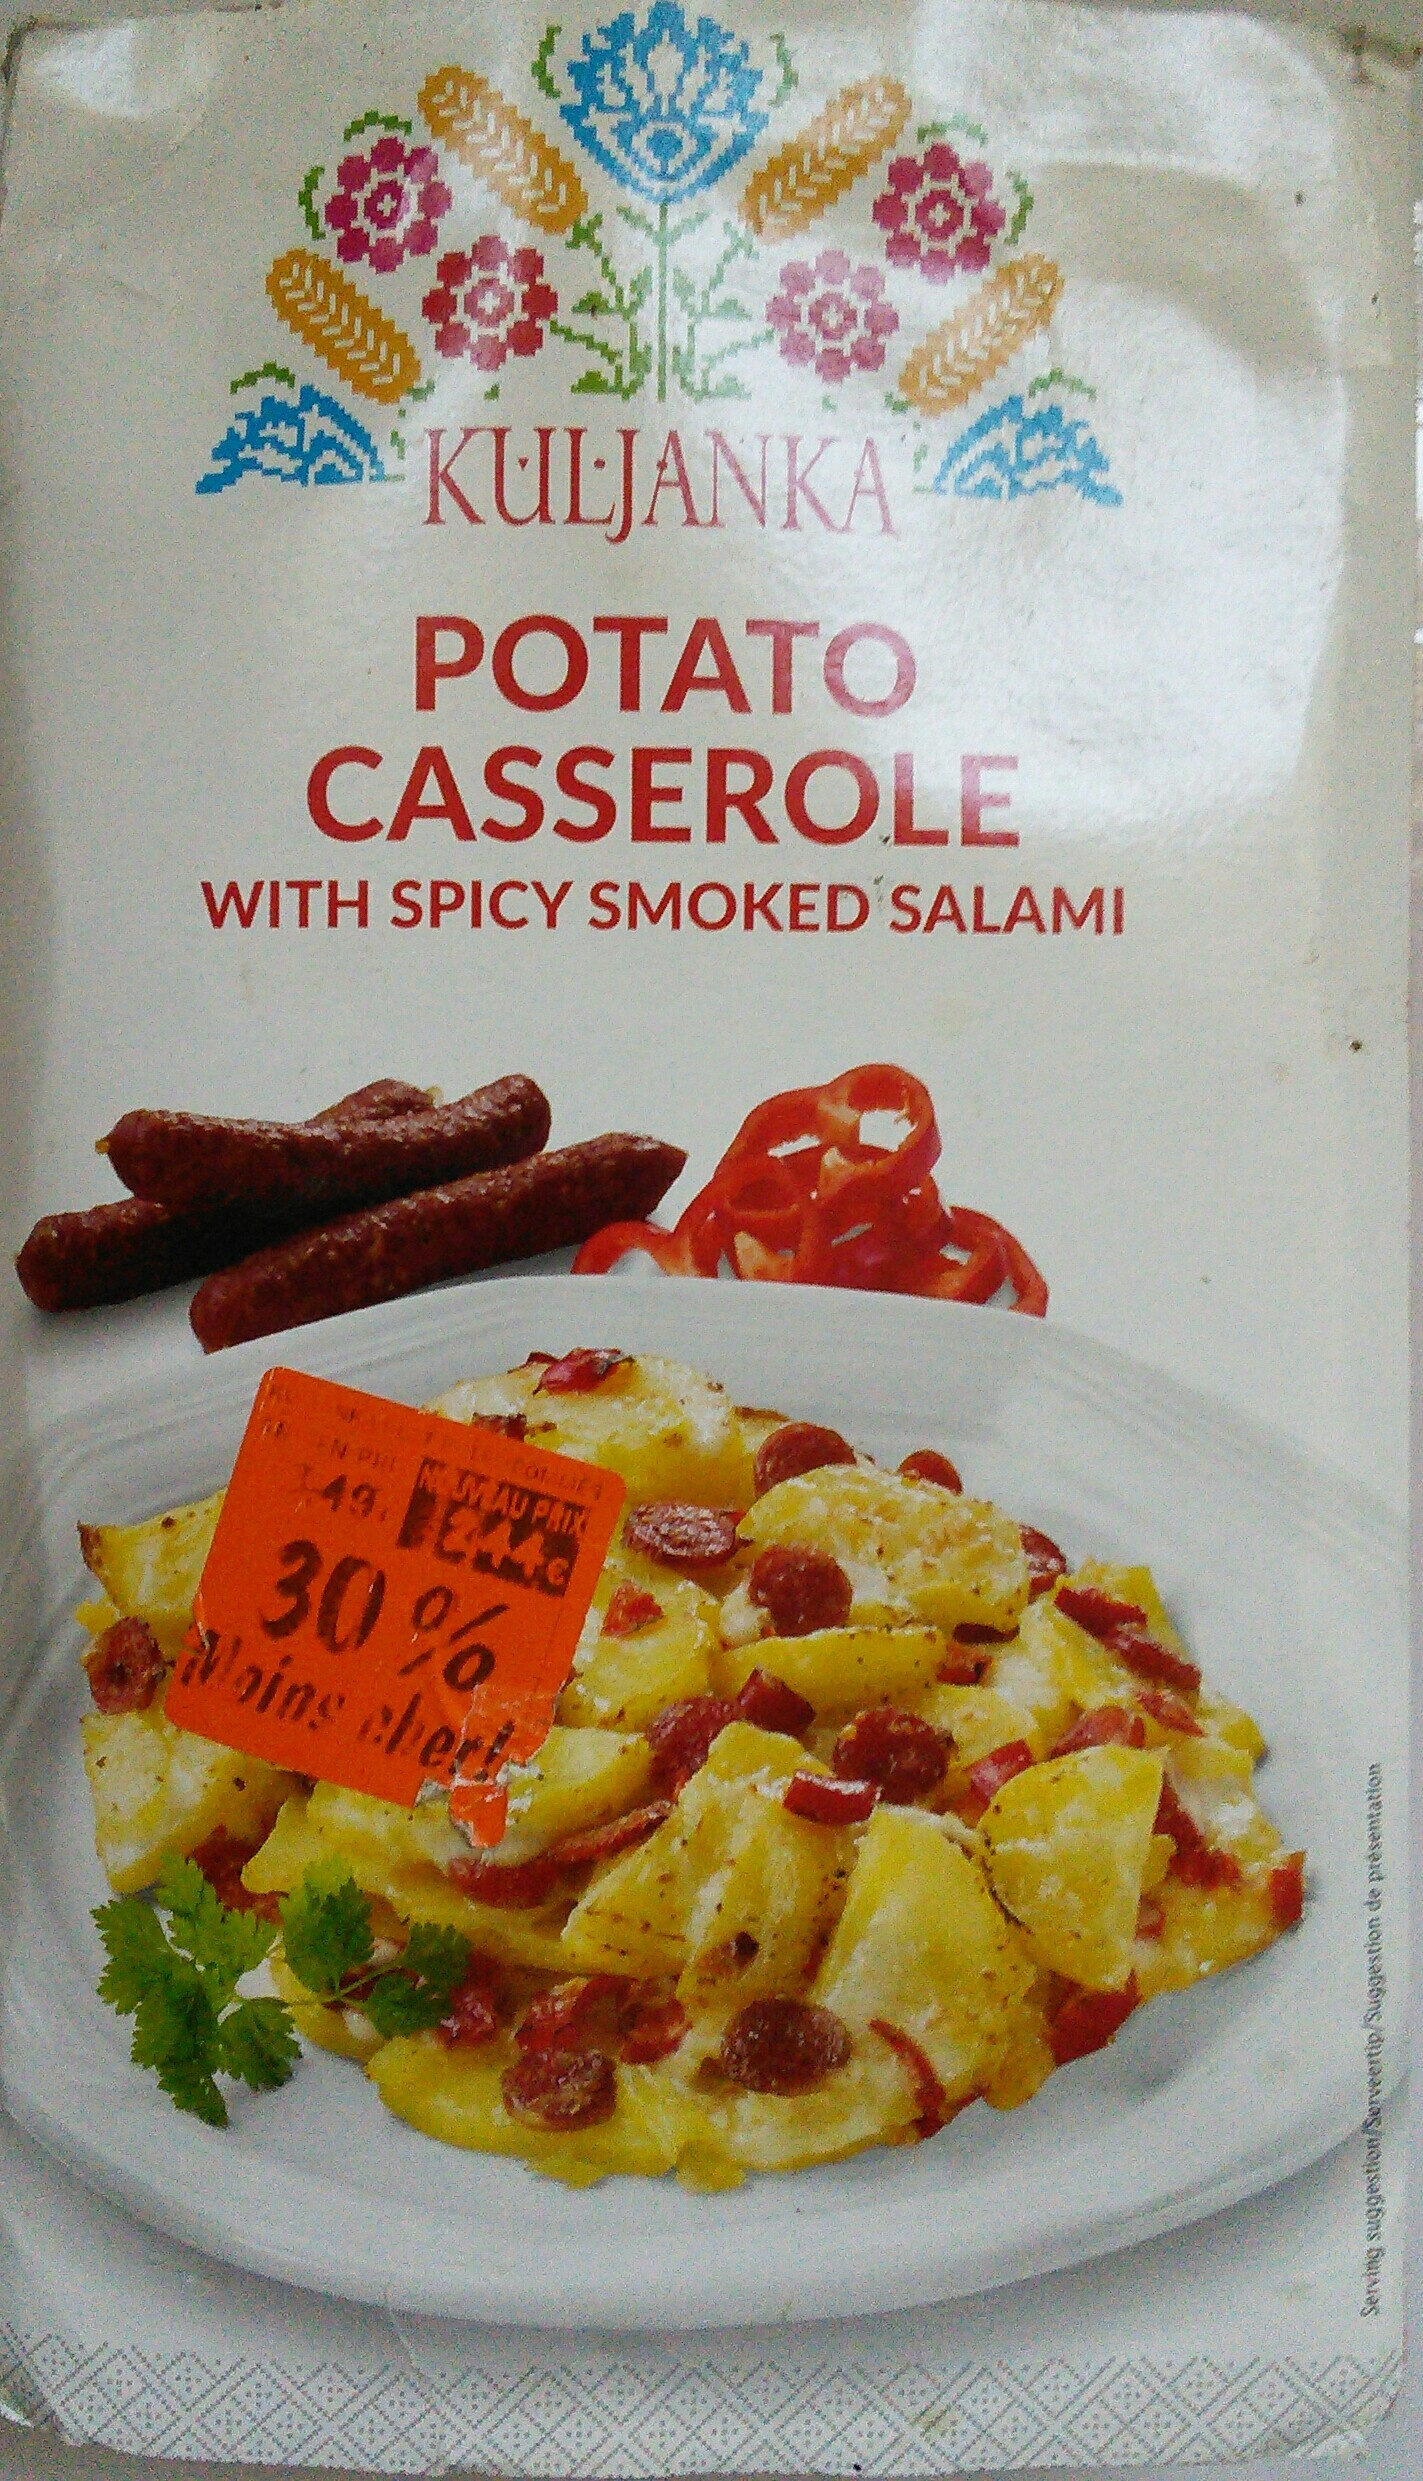 Potato Casserole with spicy smoked salami - Product - fr